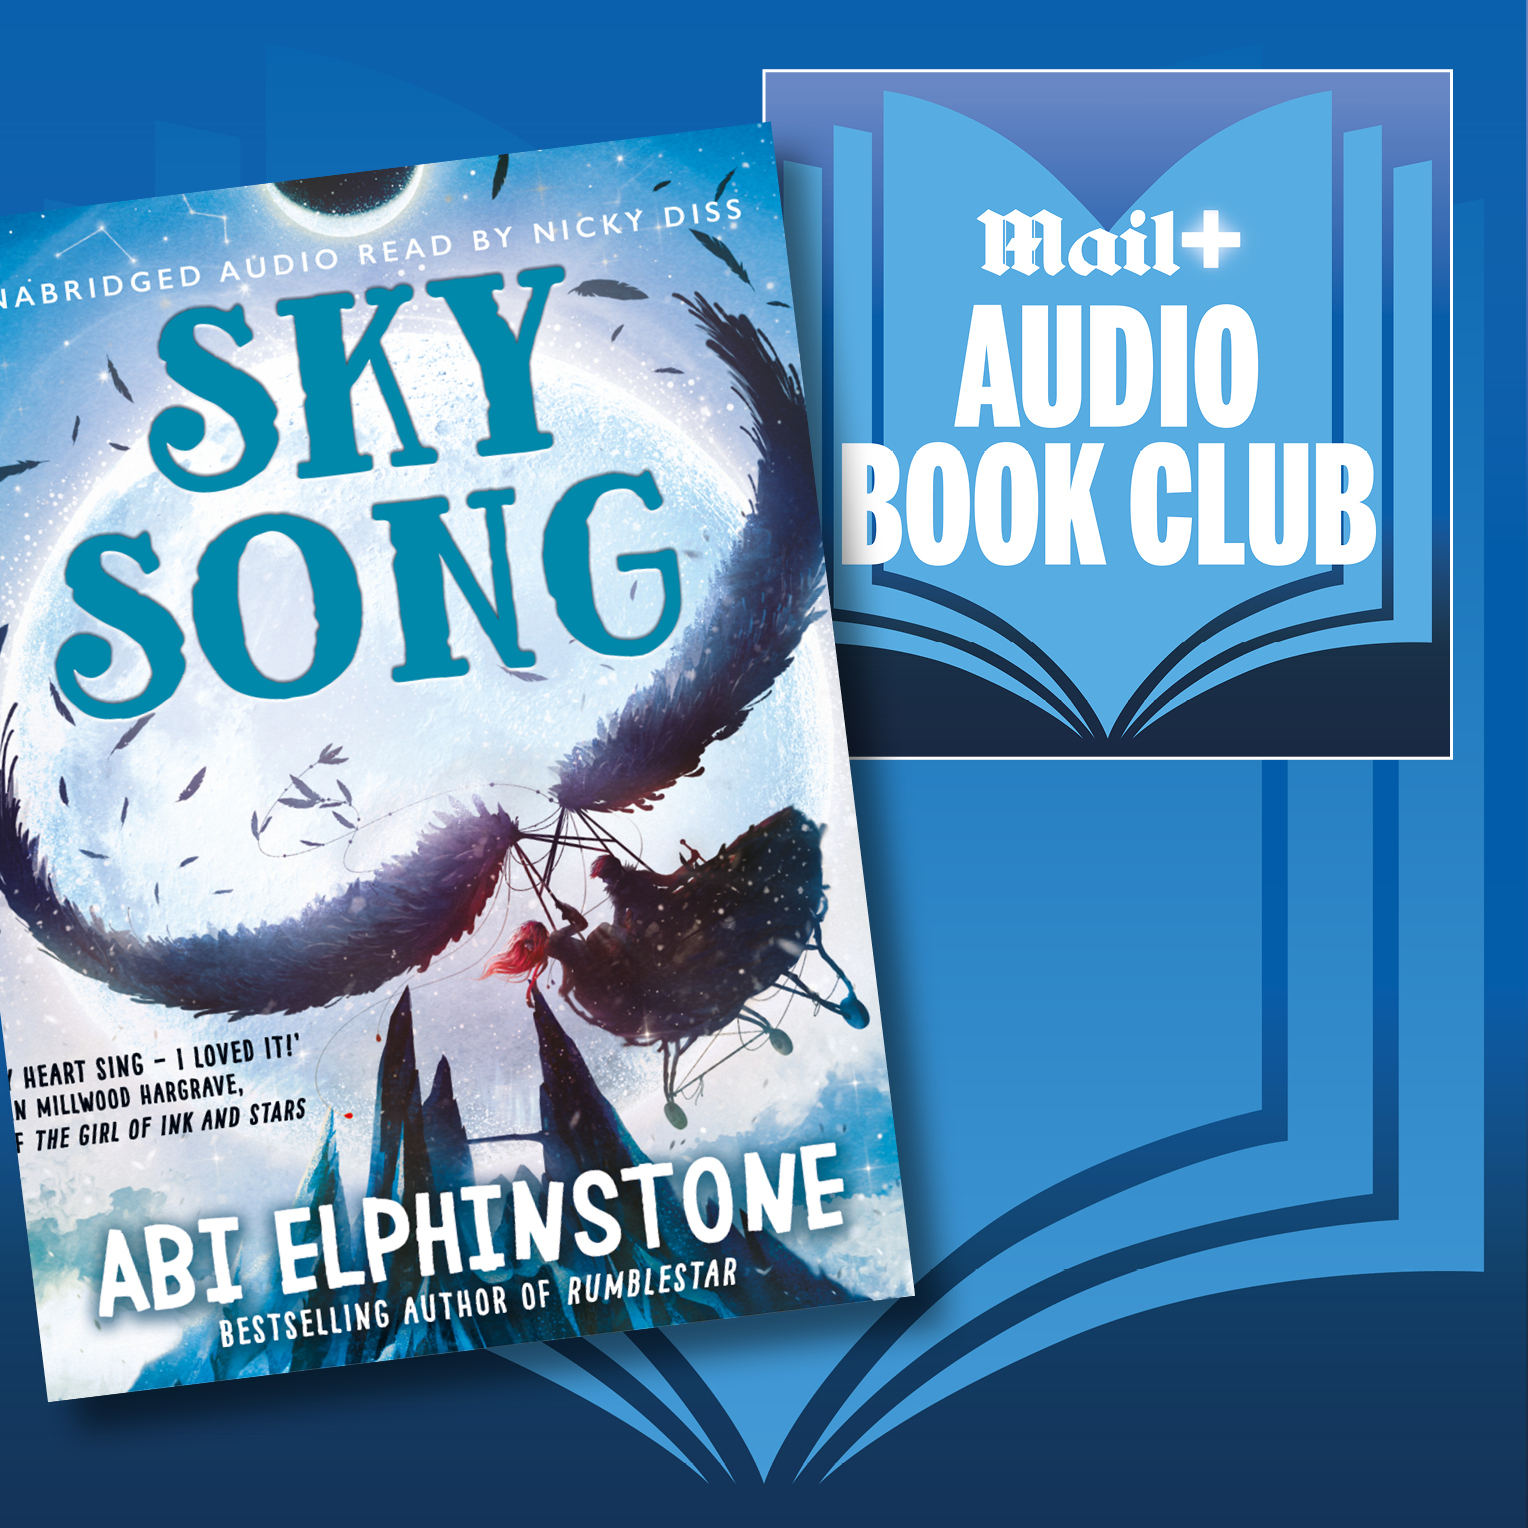 Part 1: Sky Song by Abi Elphinstone